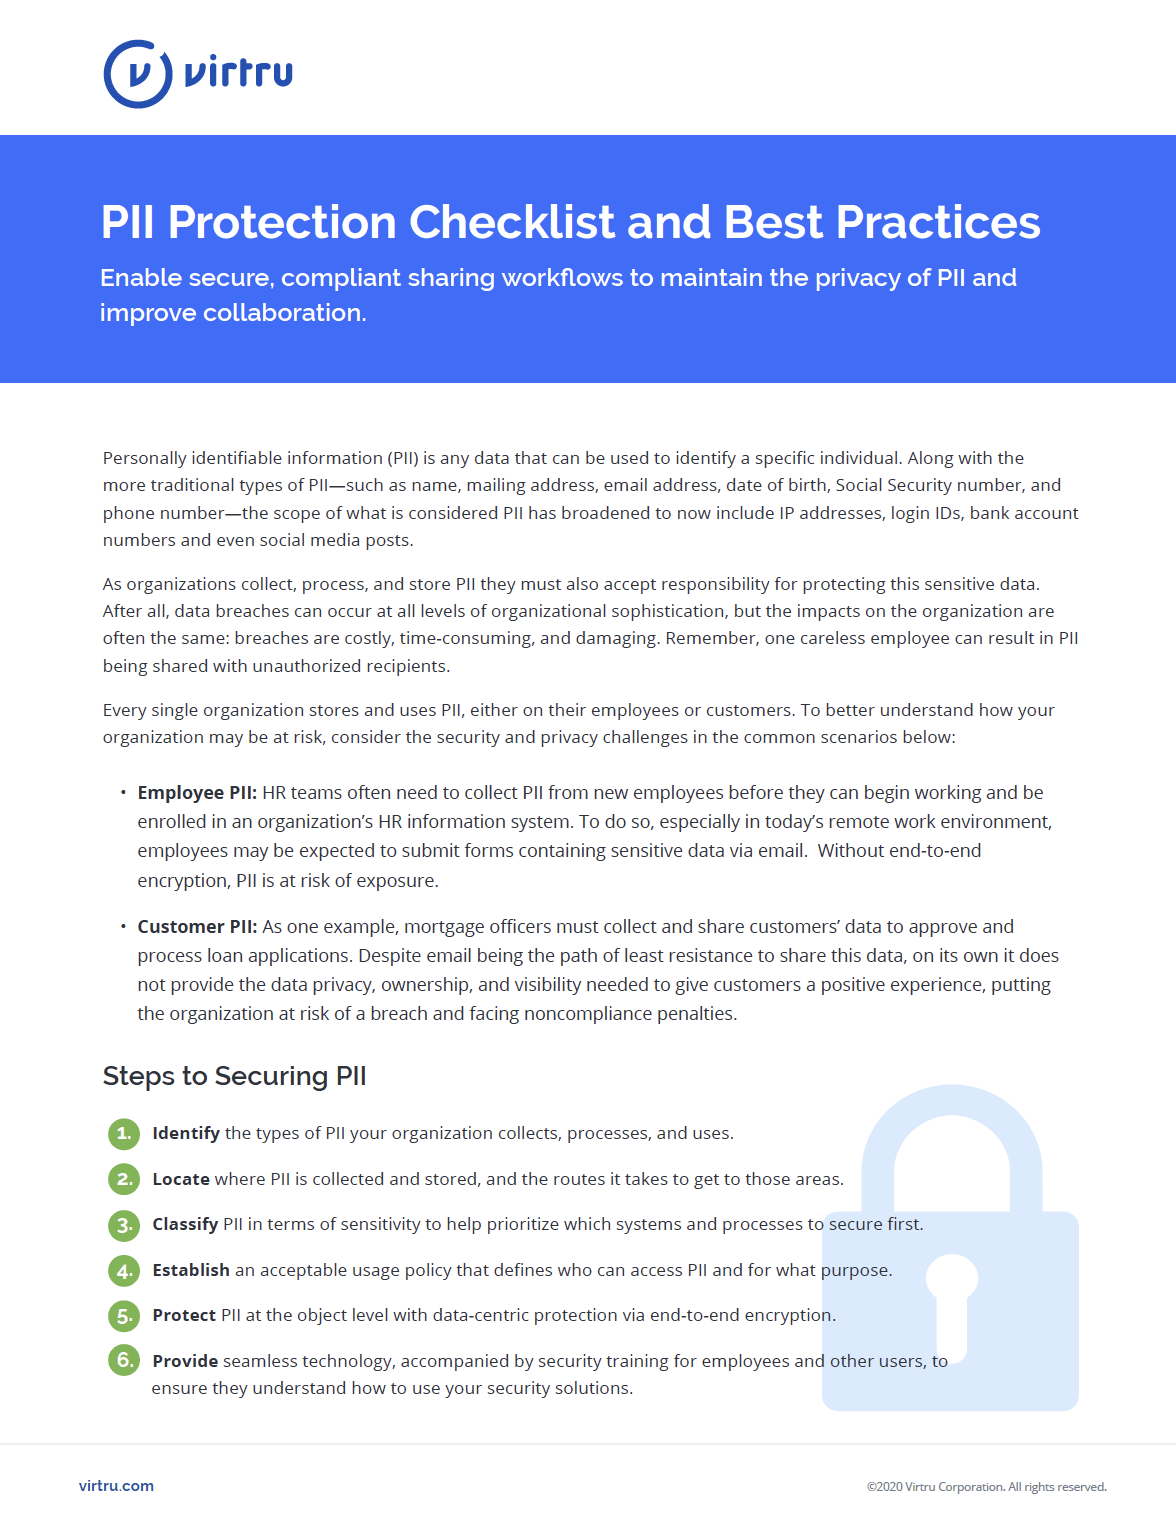 PII Protection Checklist Cover